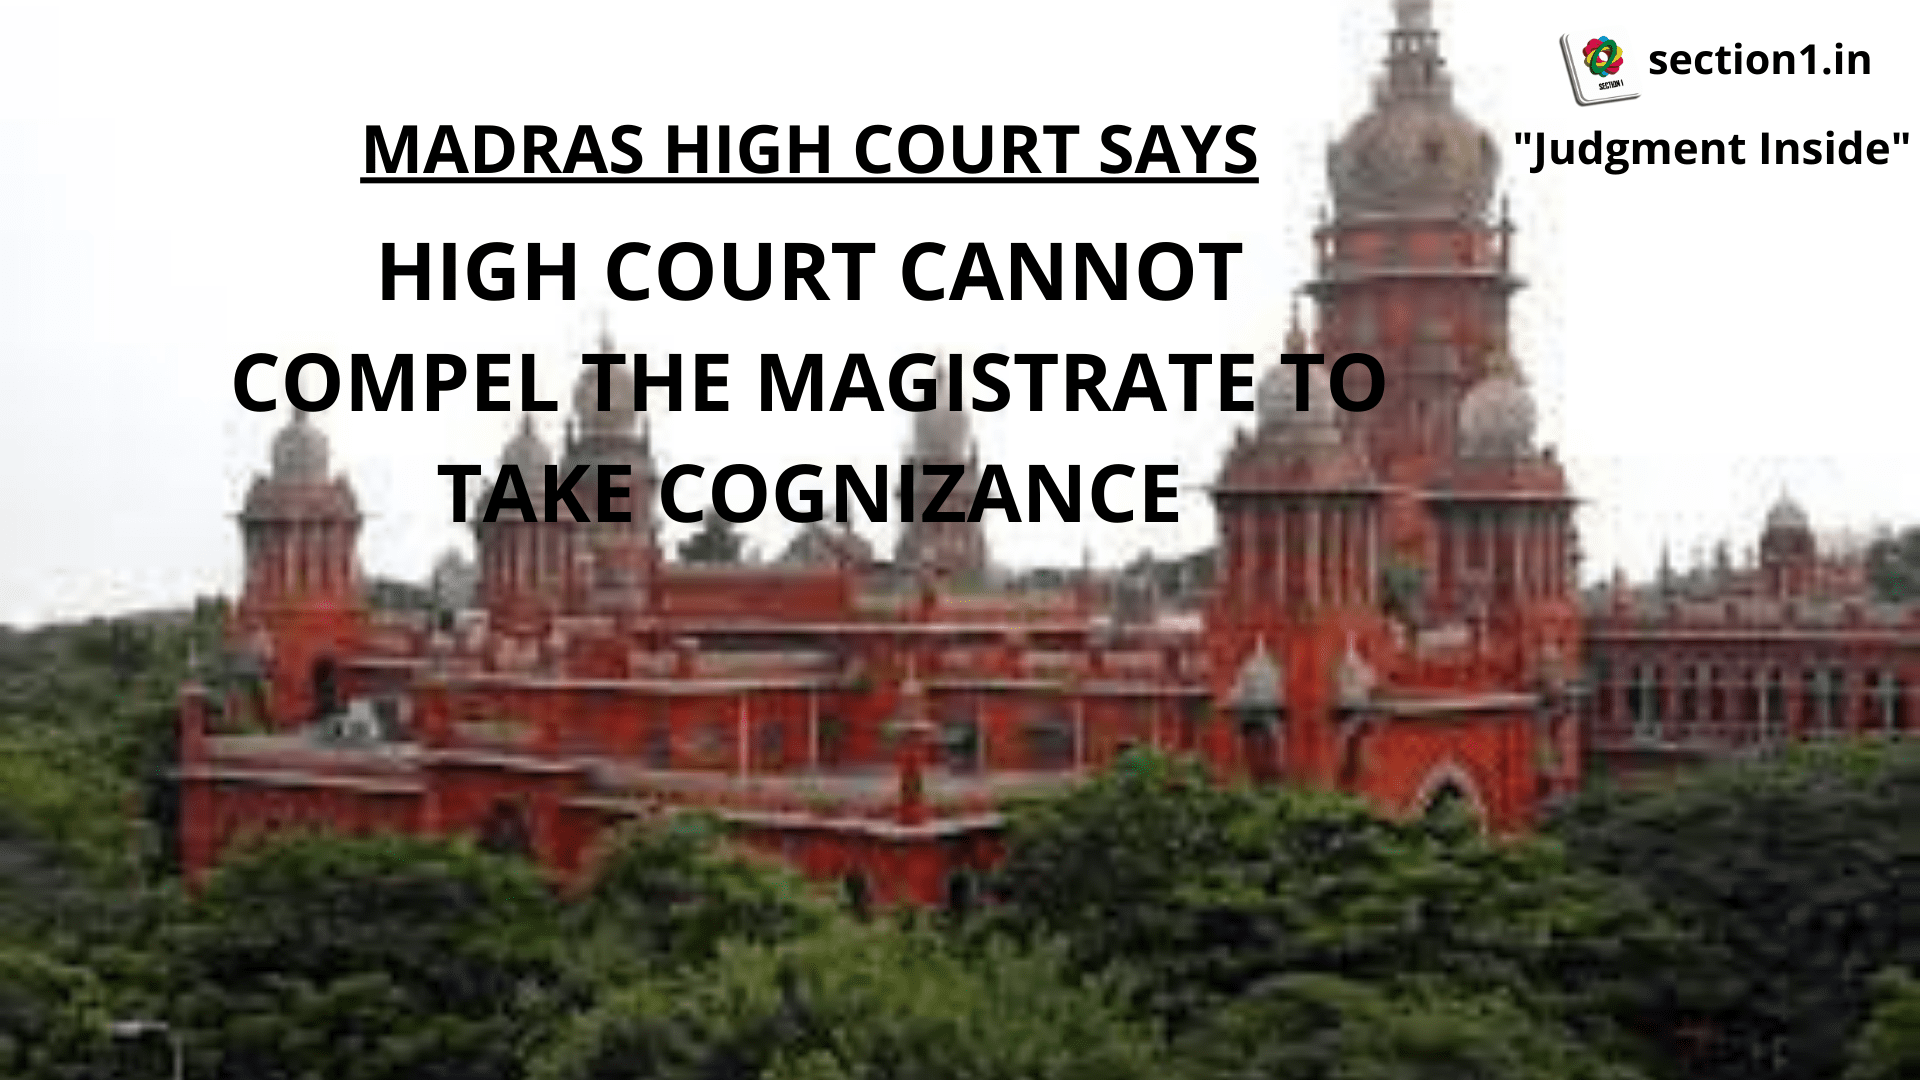 WHETHER HIGH COURT CAN COMPEL THE MAGISTRATE TO TAKE COGNIZANCE?